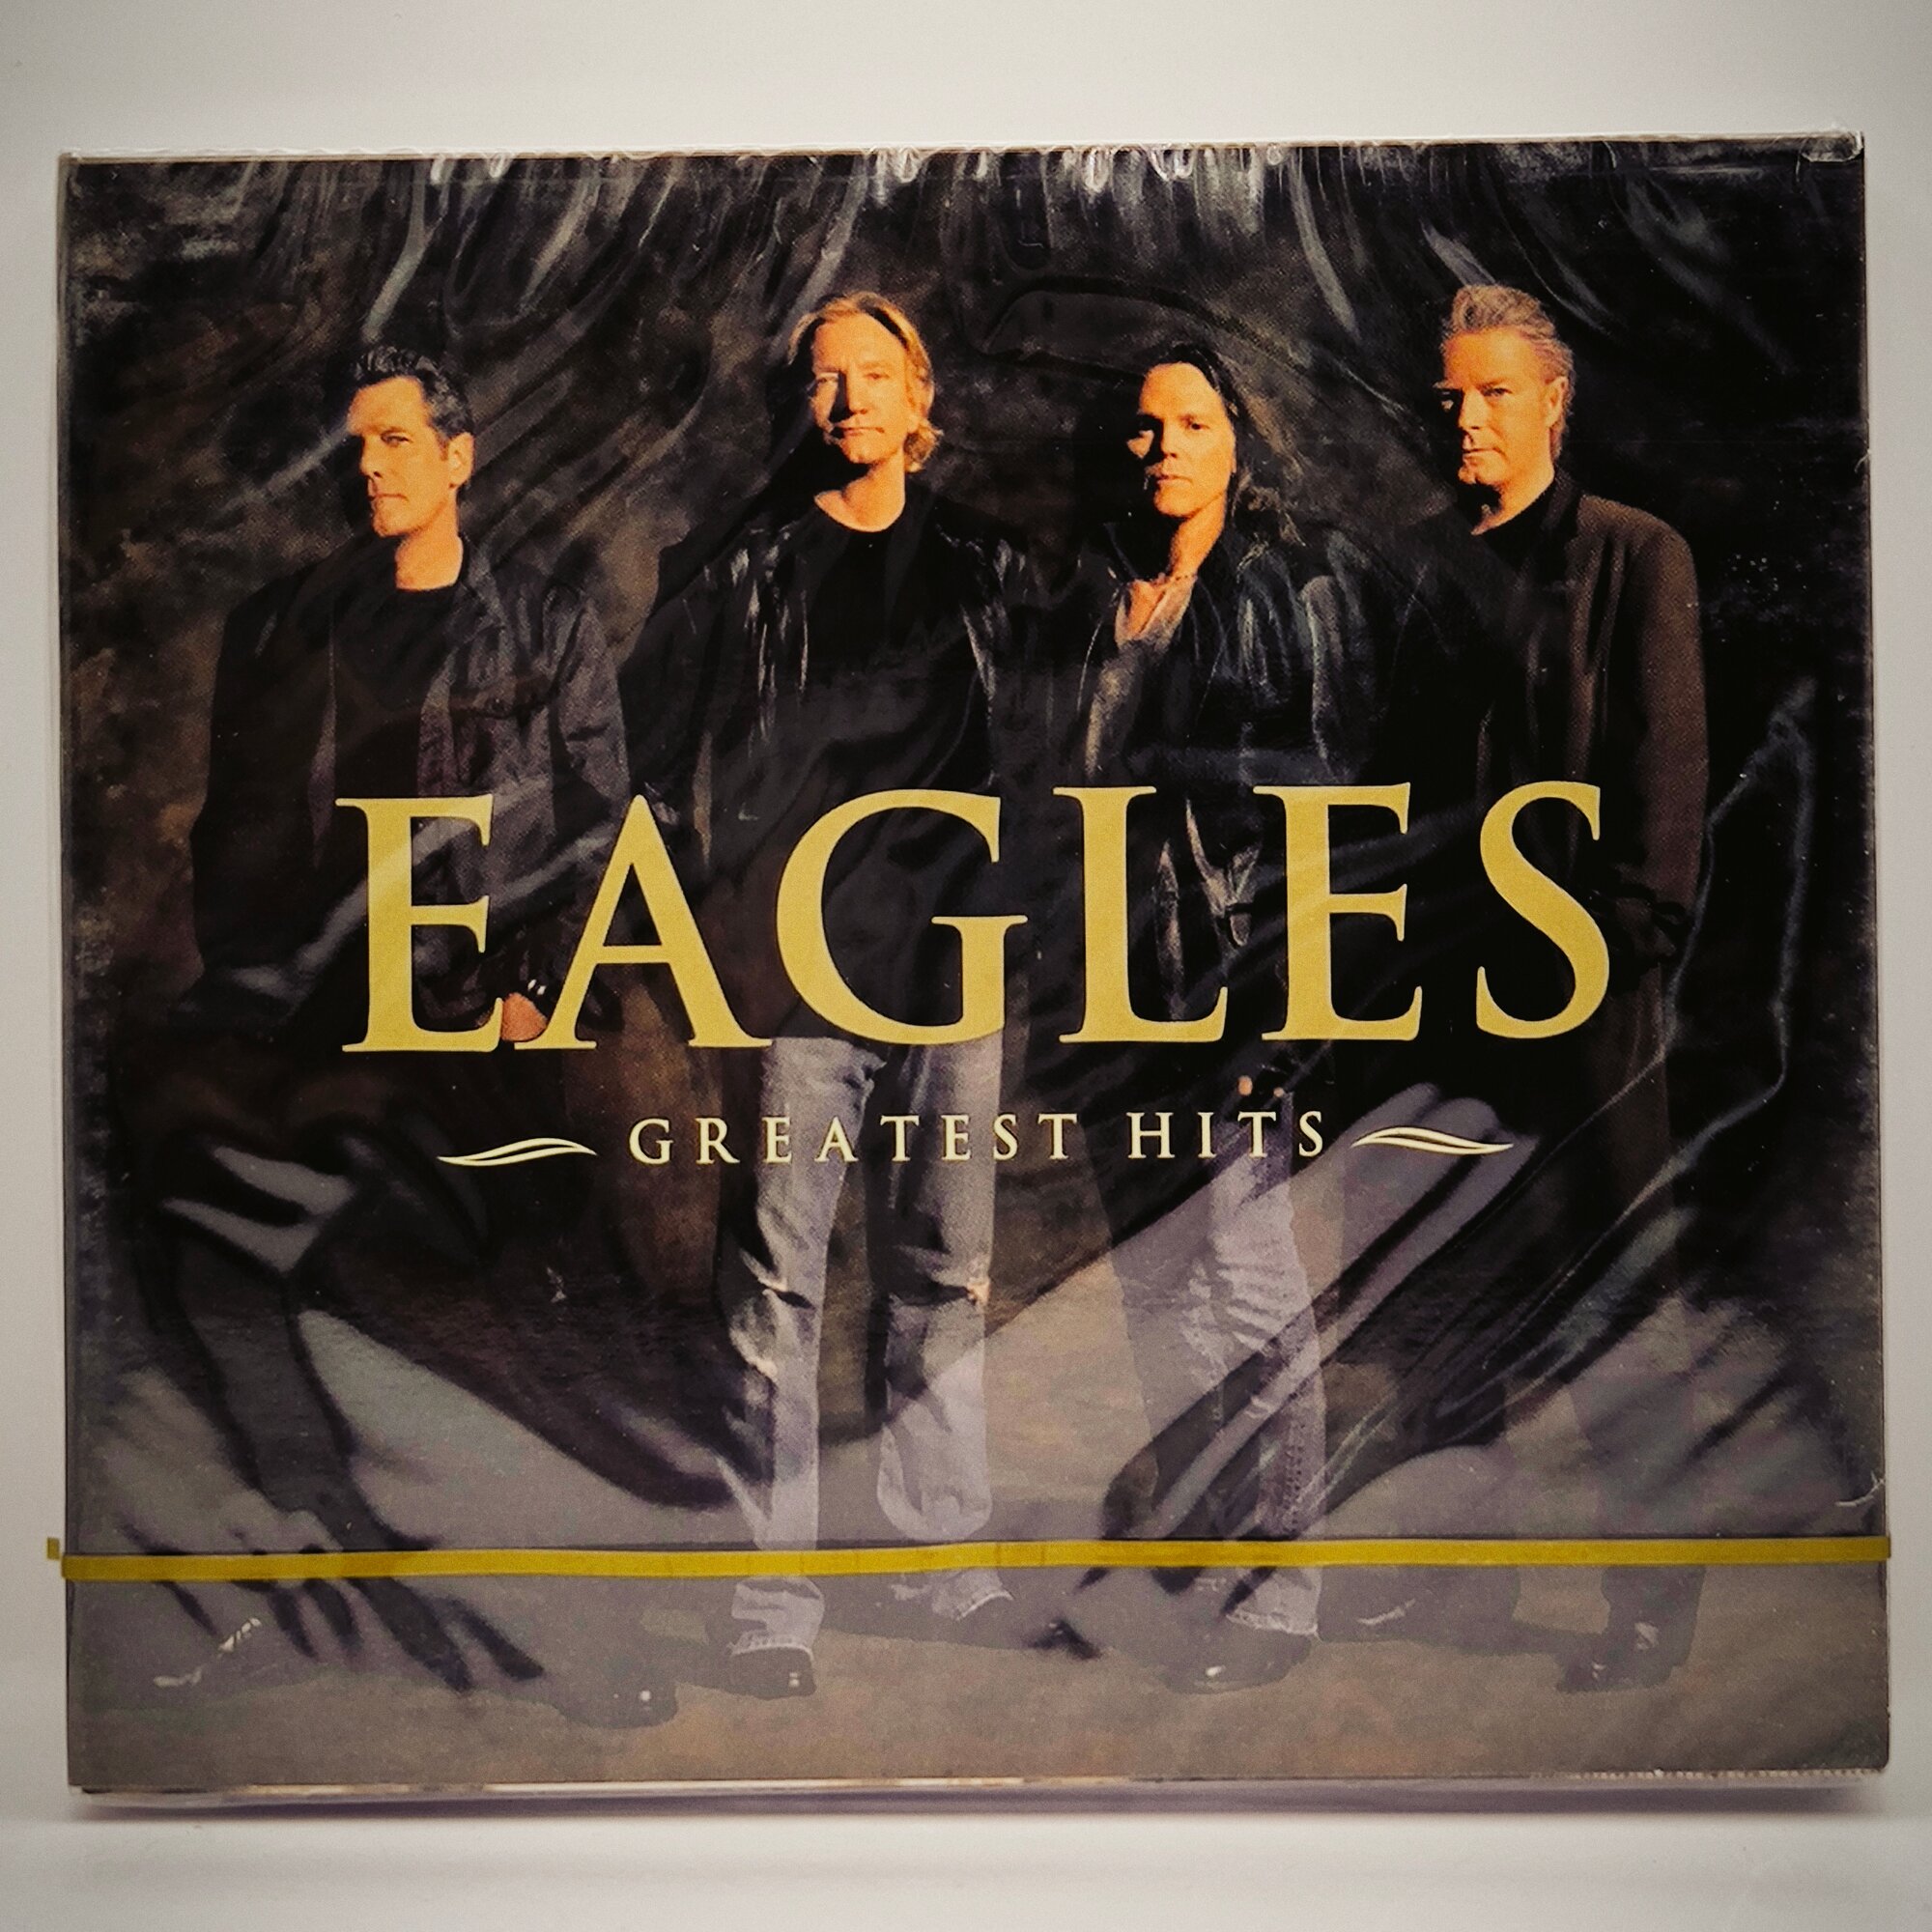 Eagles - Greatest Hits (2CD)